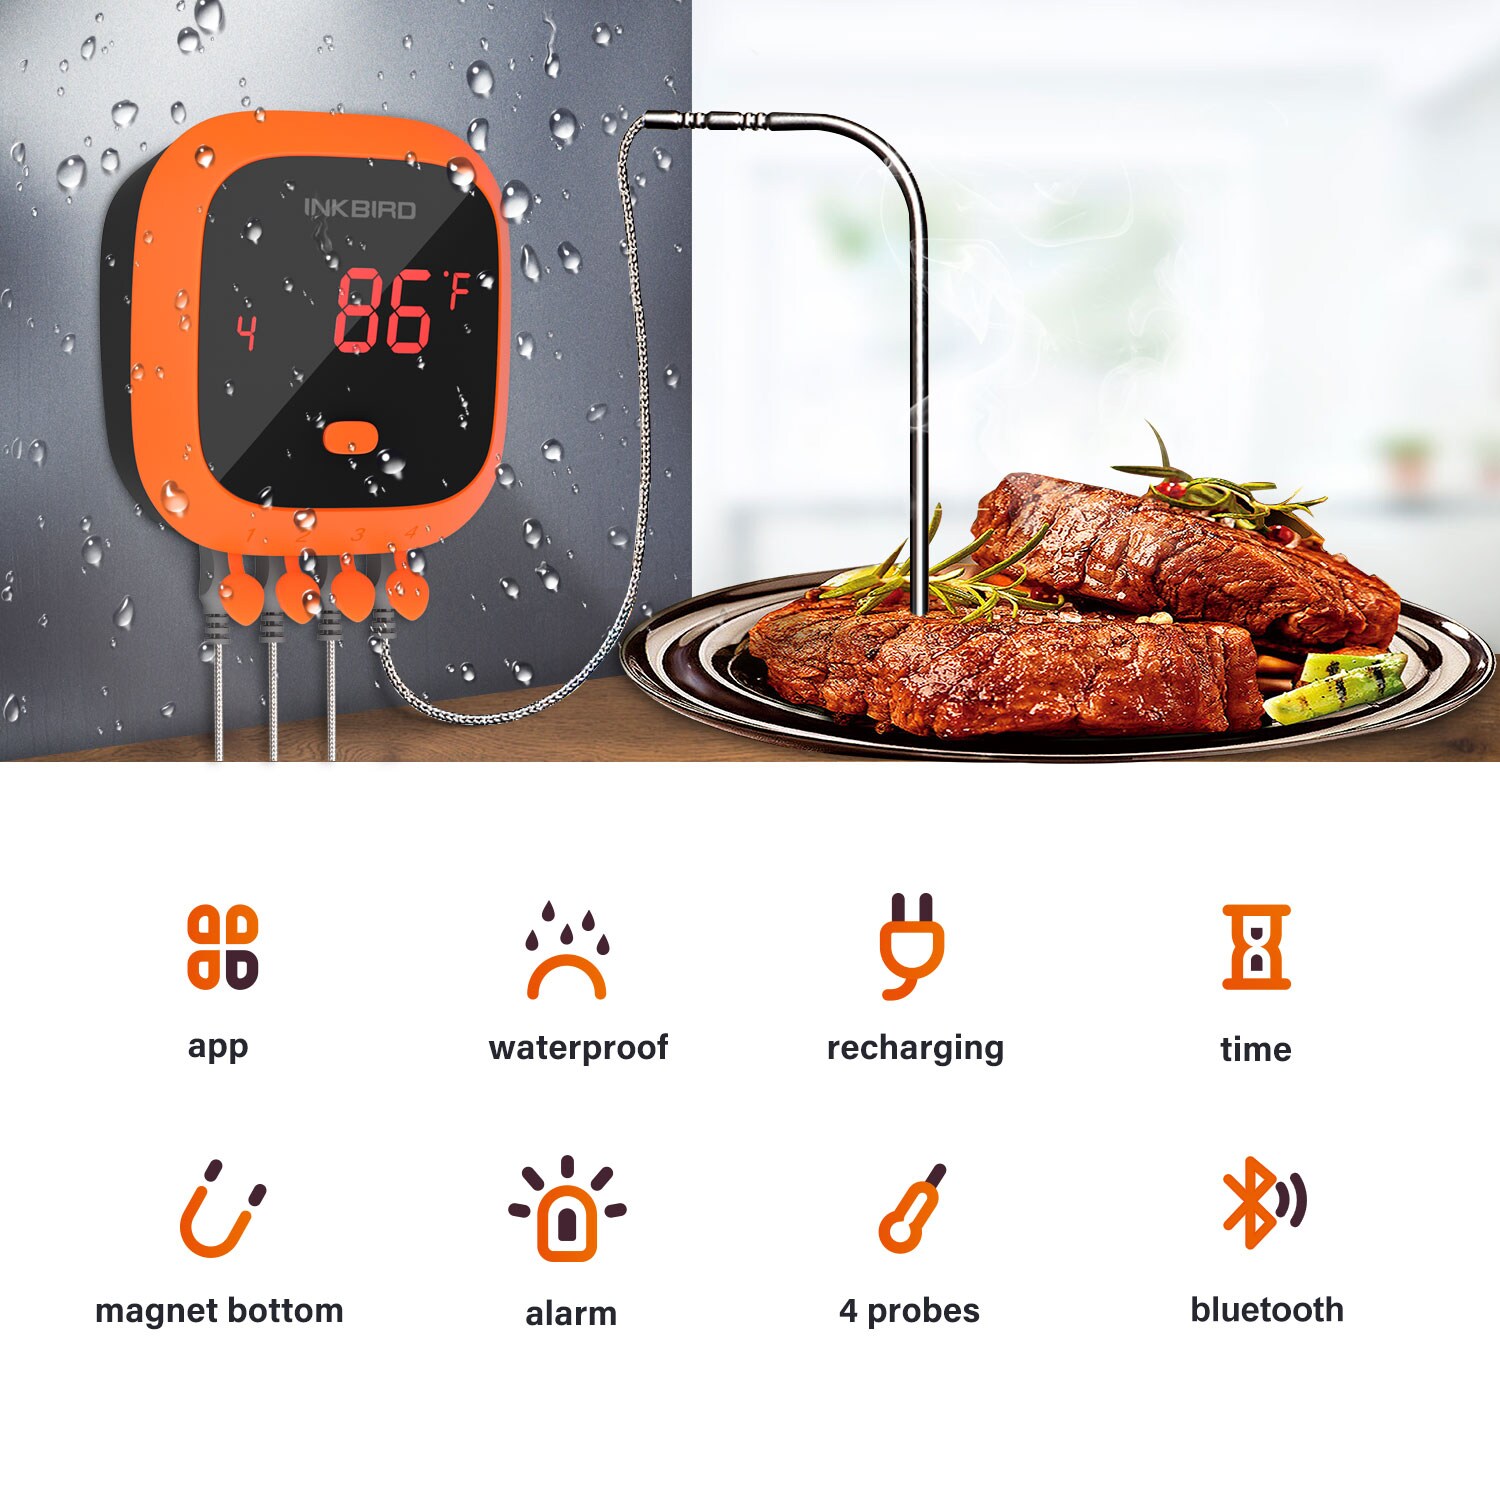 INKBIRD IBBQ-4T Square Dial Wireless BBQ Meat Thermometer, Wifi Control, Alarms, Temperature Records